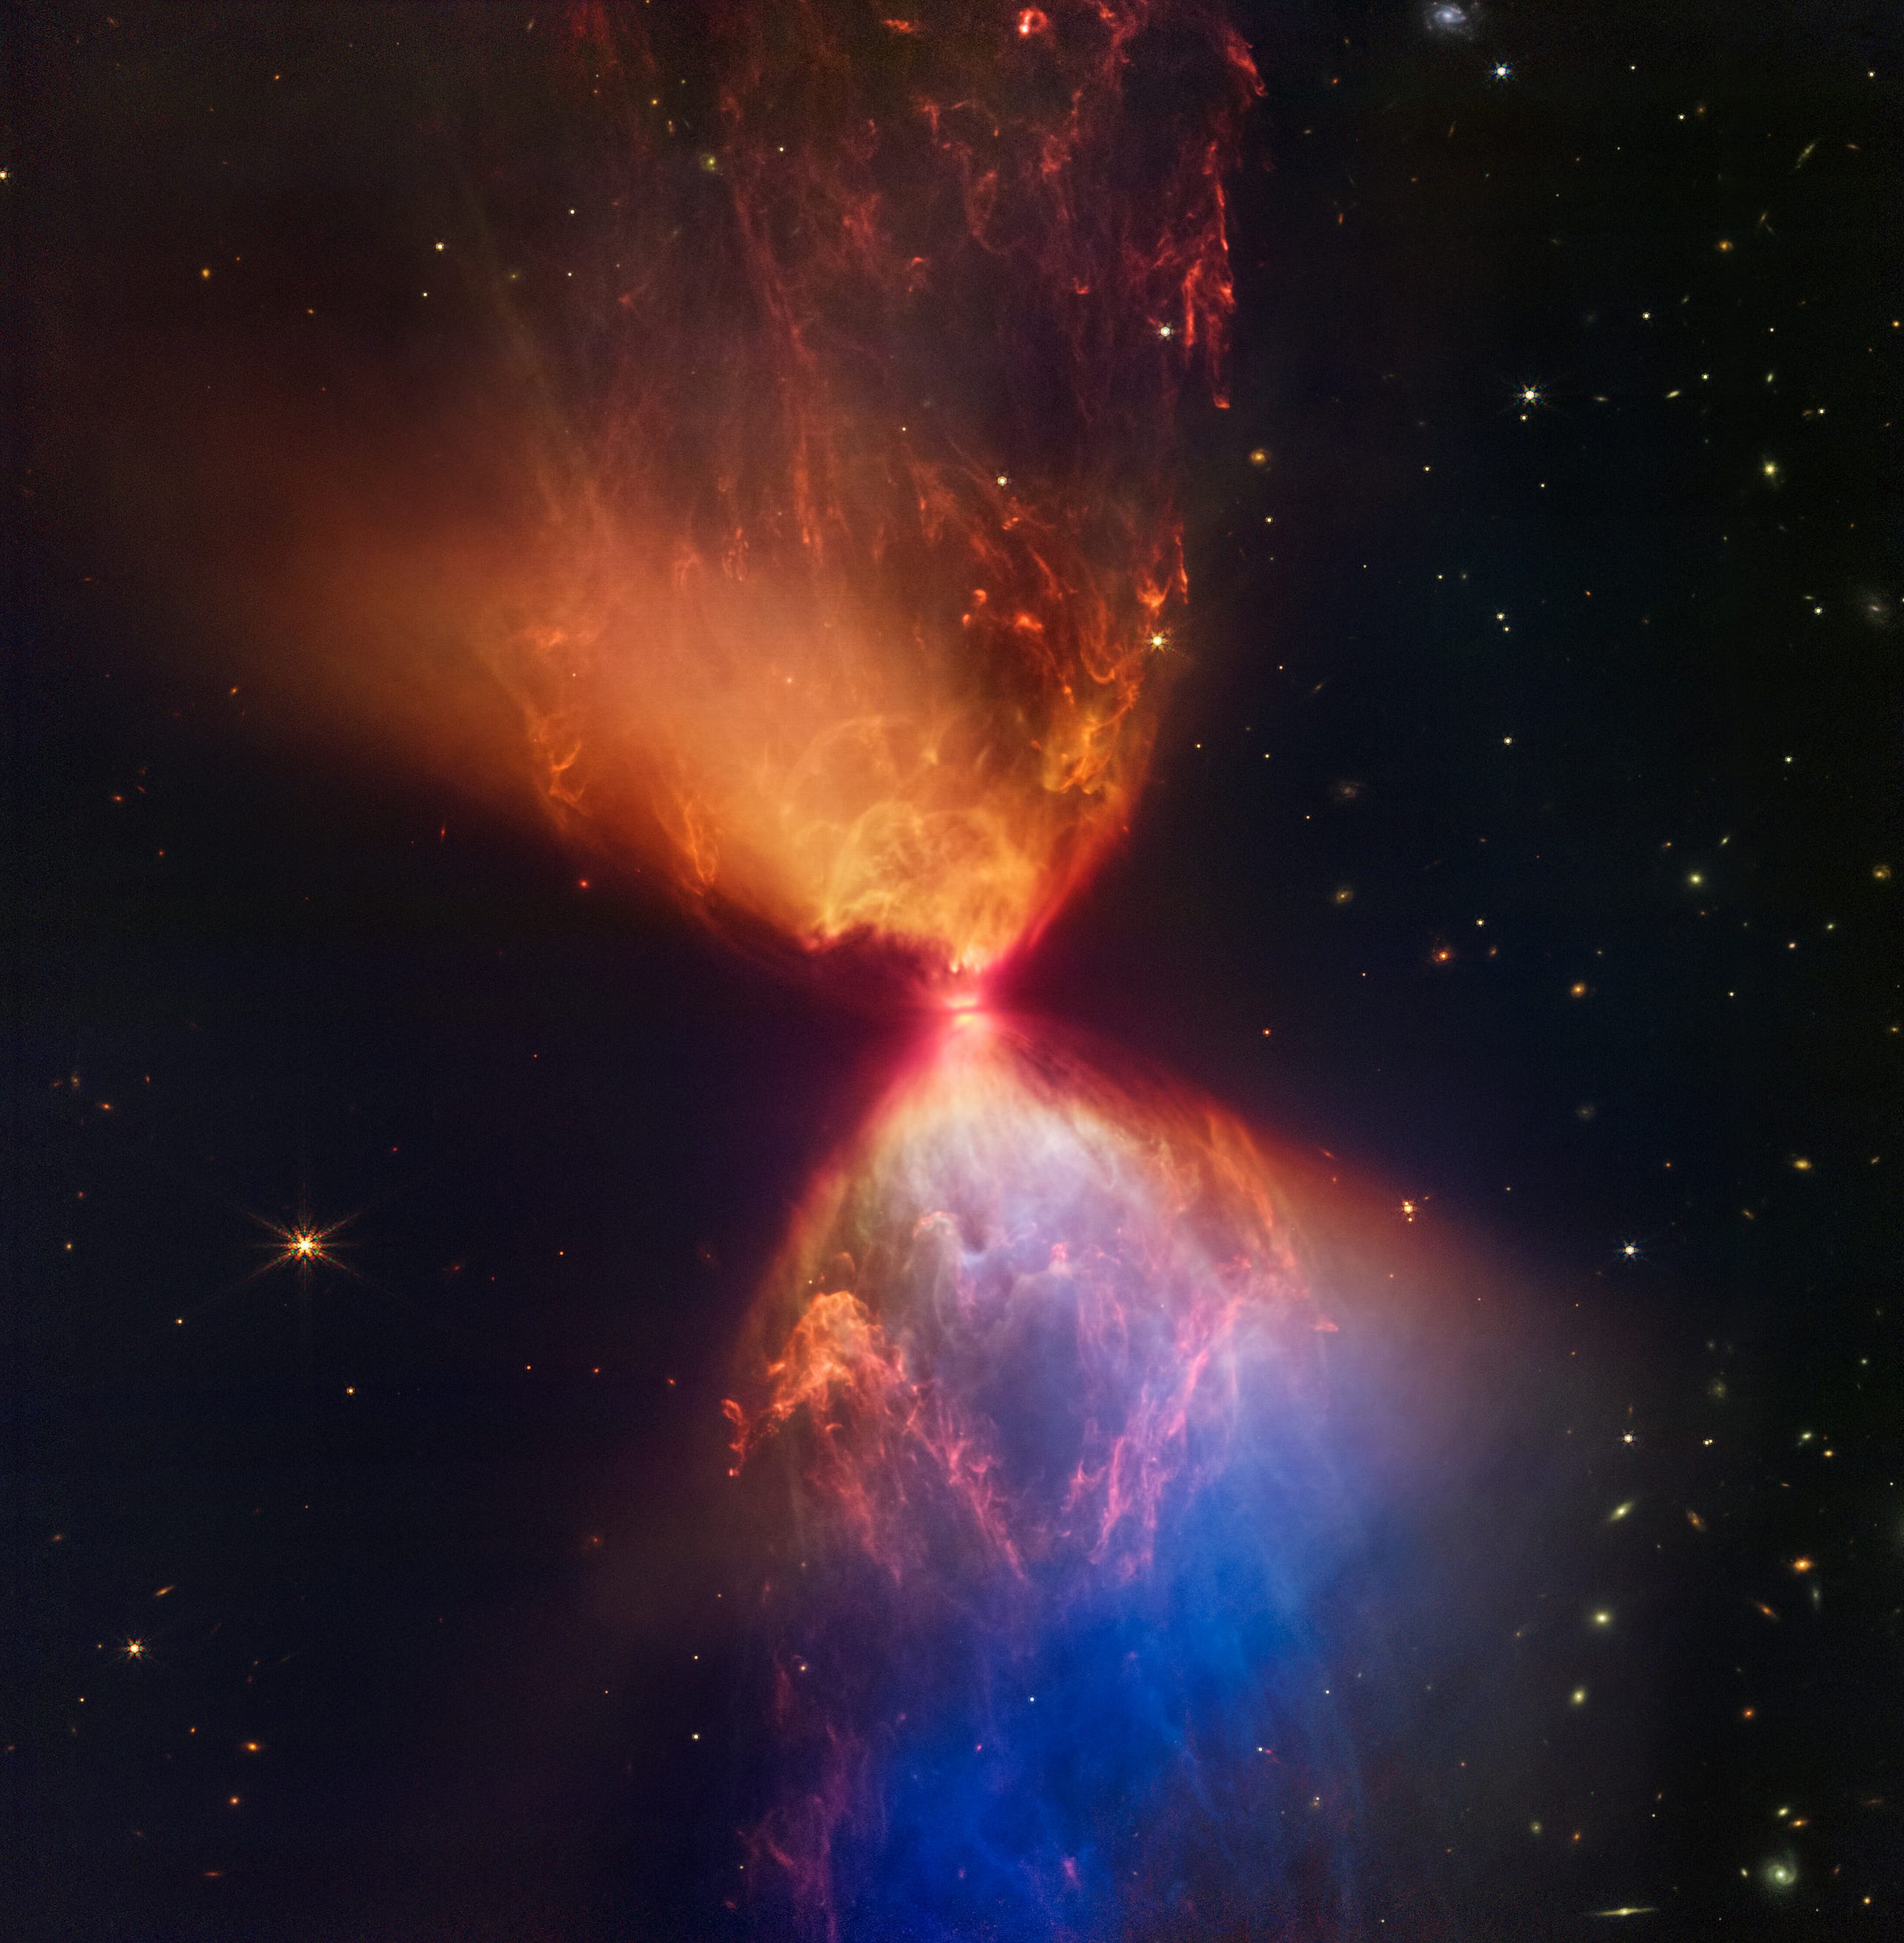 Webb’s telescope took an amazing photo of a fiery hourglass. What does